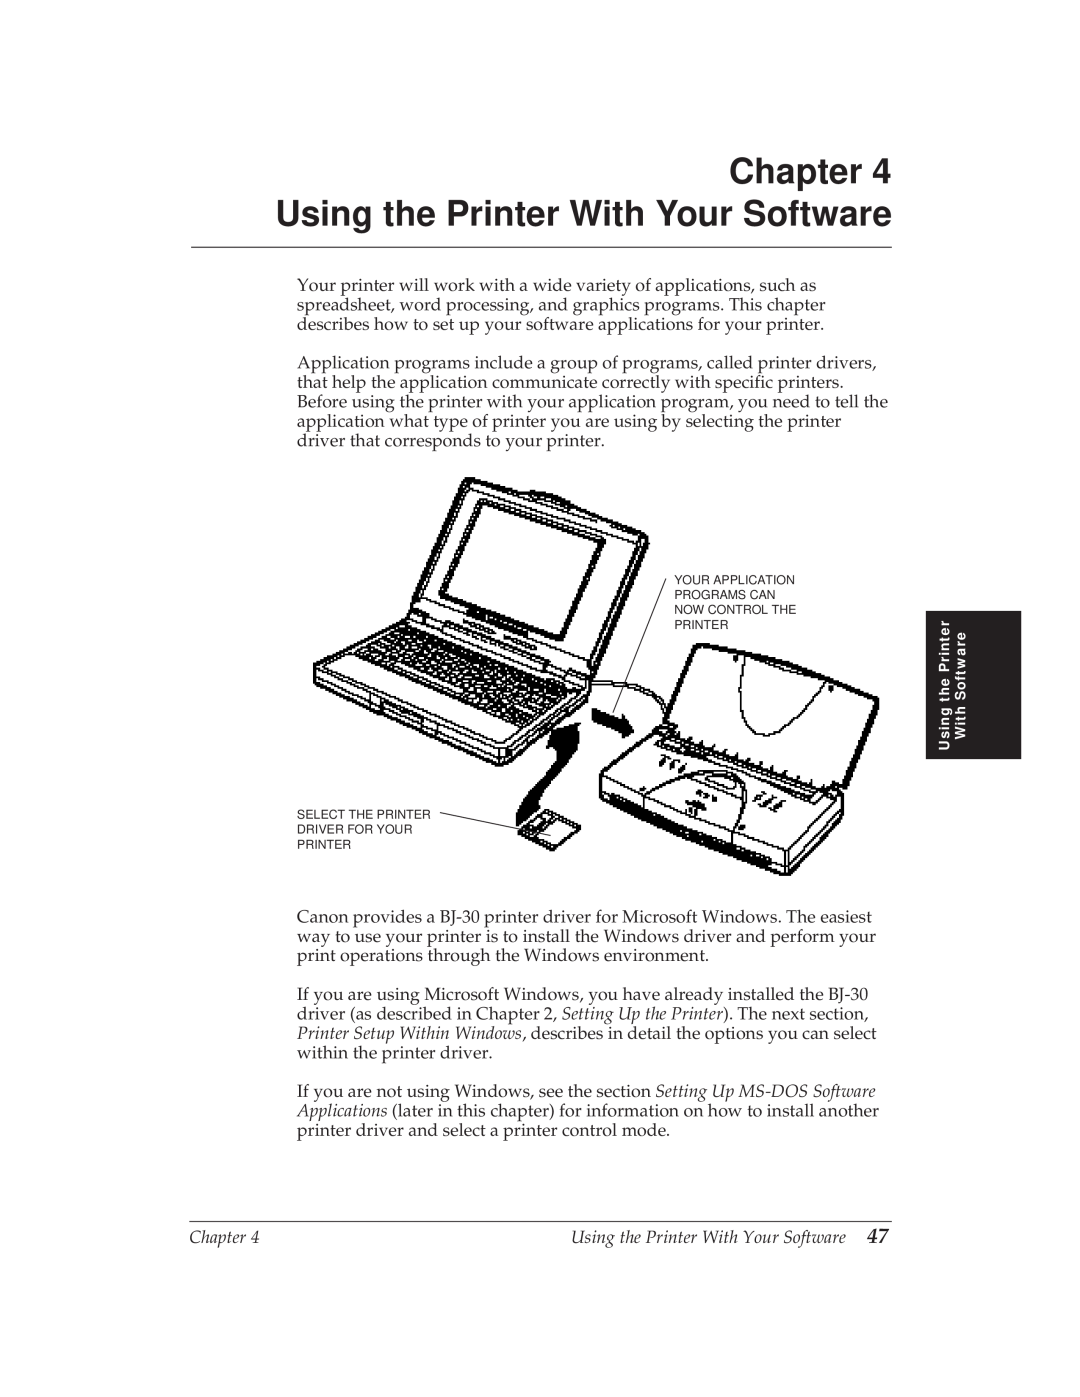 Canon BJ-30 manual Using the Printer With Your Software 